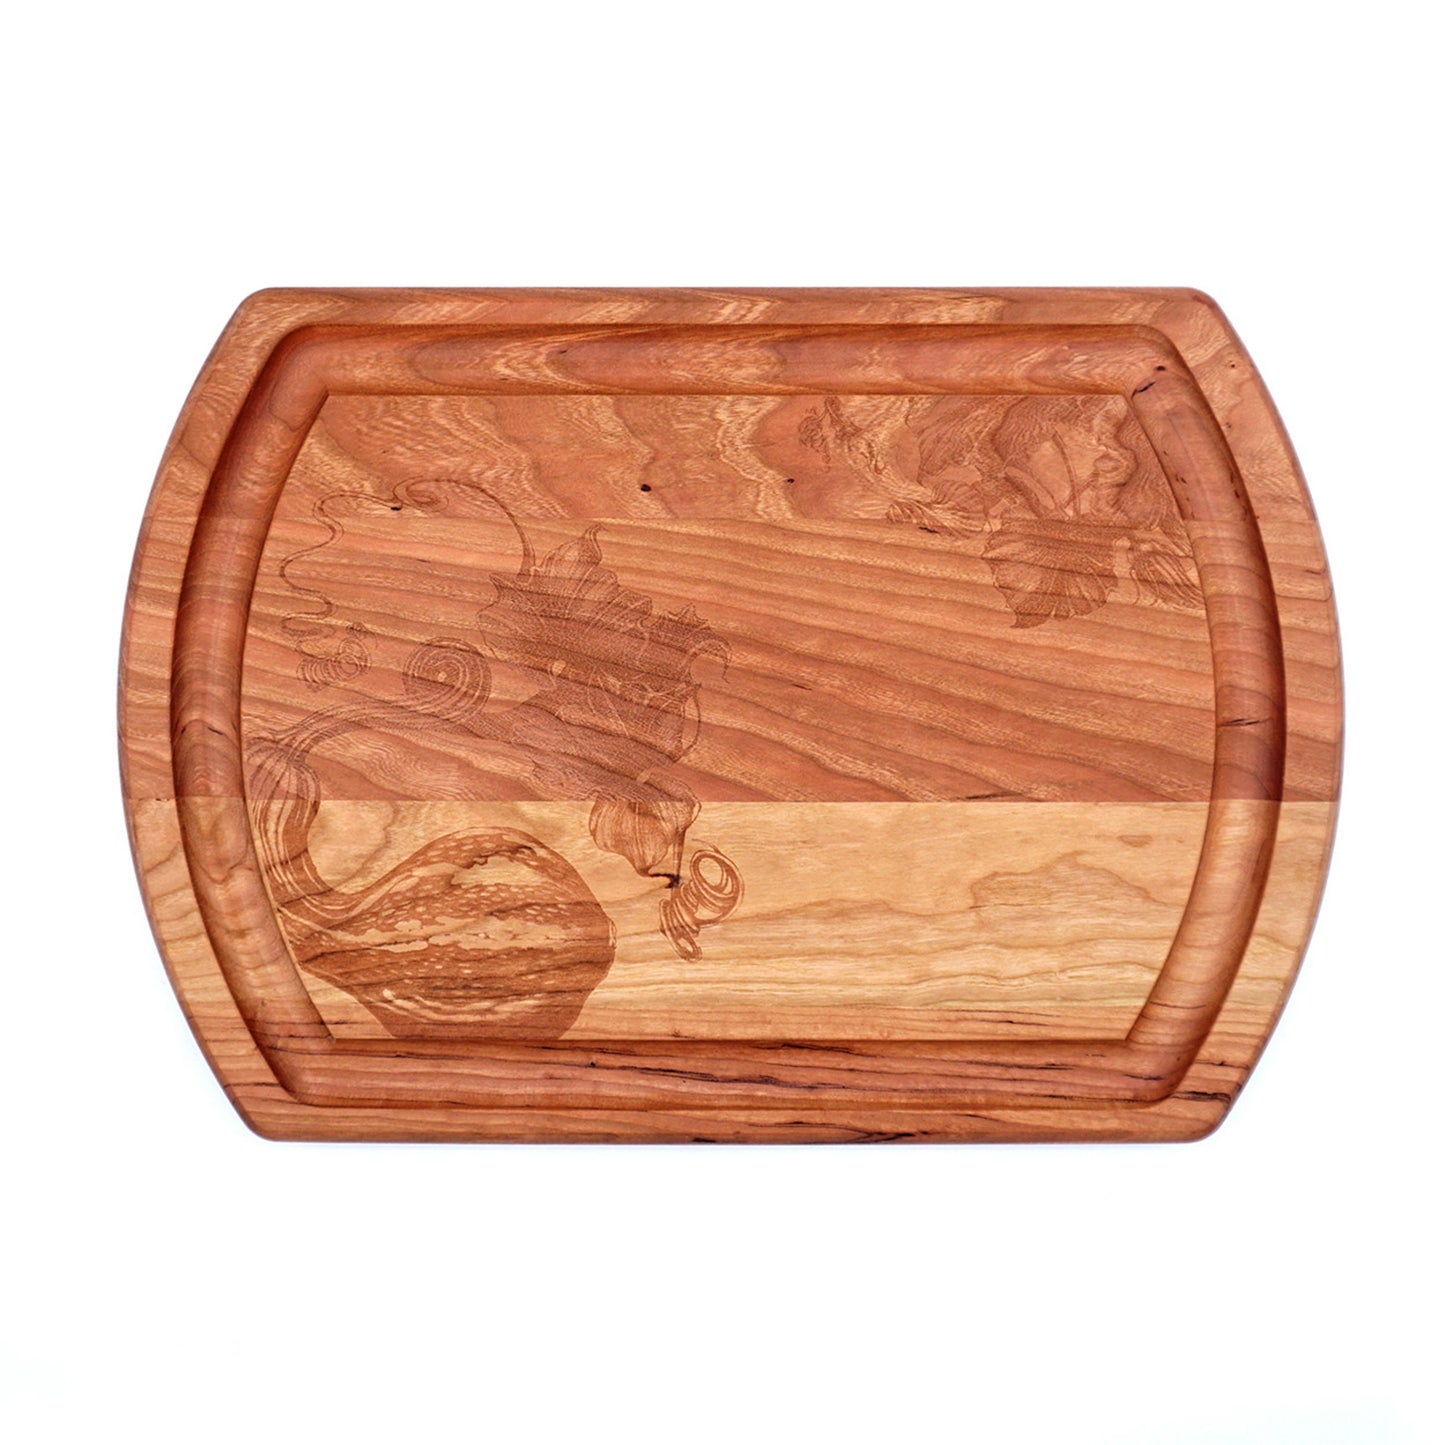 Laura Zindel Cherry Reversible Carving Board - More designs available